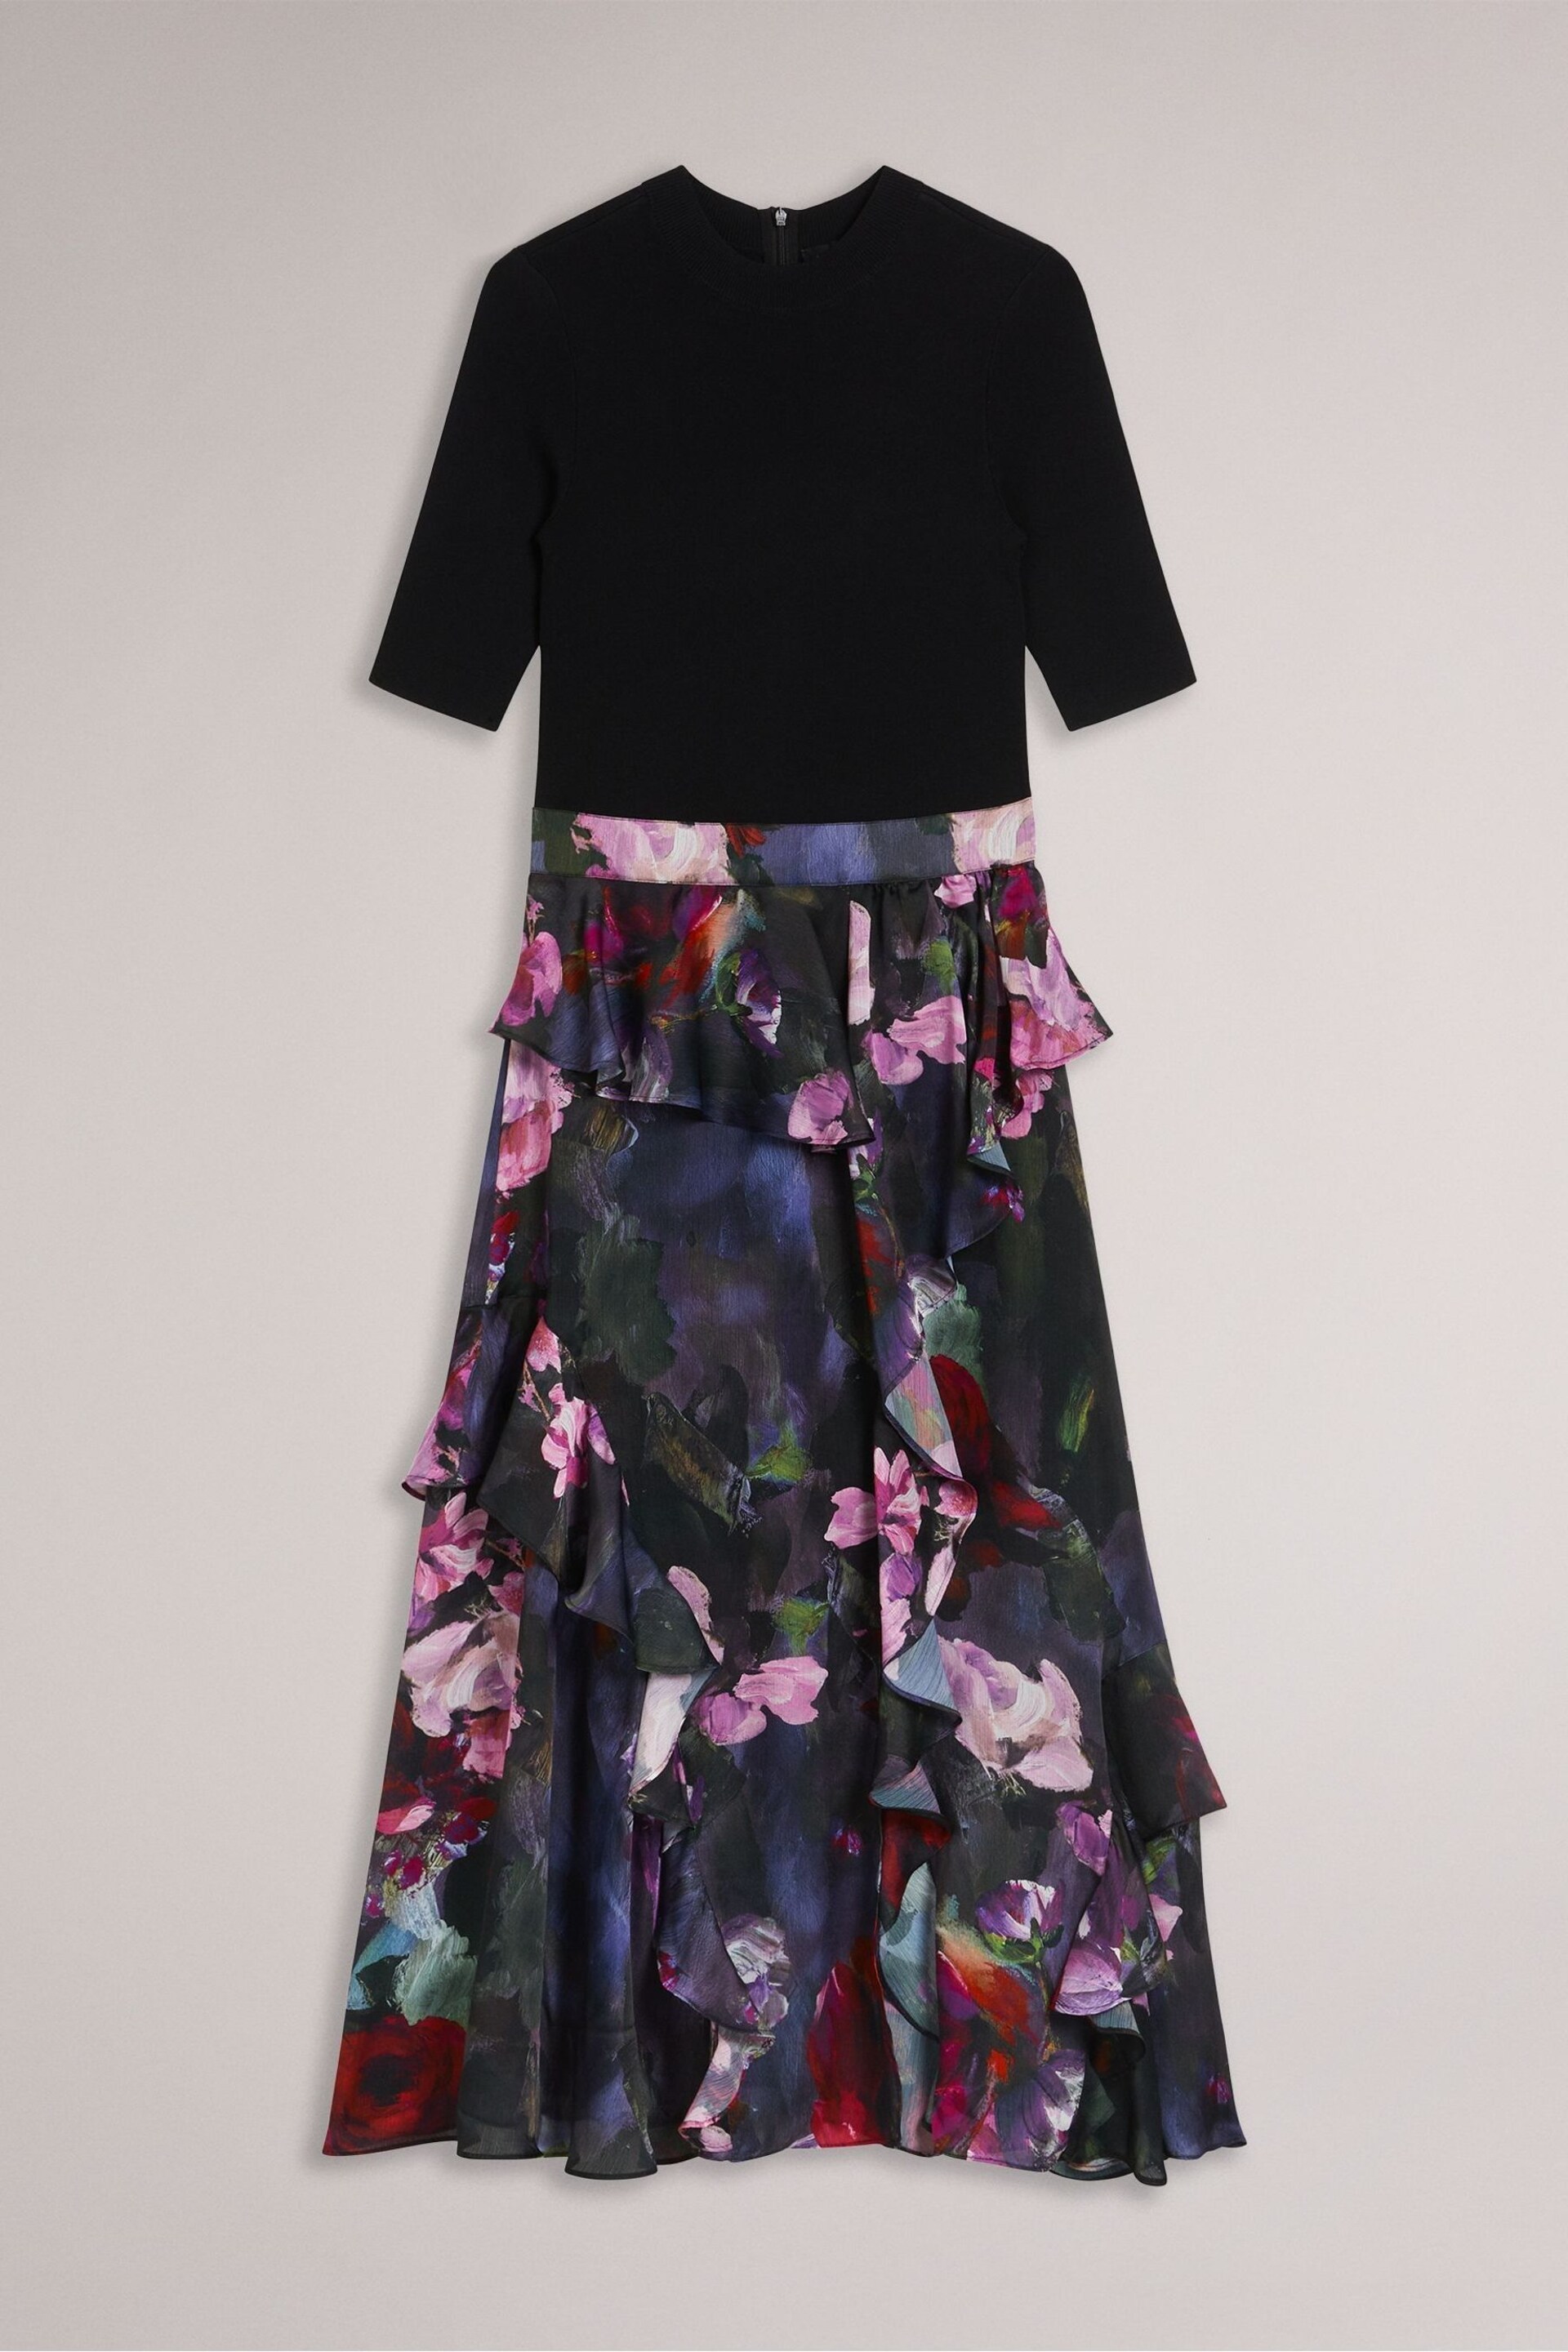 Ted Baker Black Rowana Fitted Knit Bodice Dress With Ruffle Skirt - Image 4 of 6